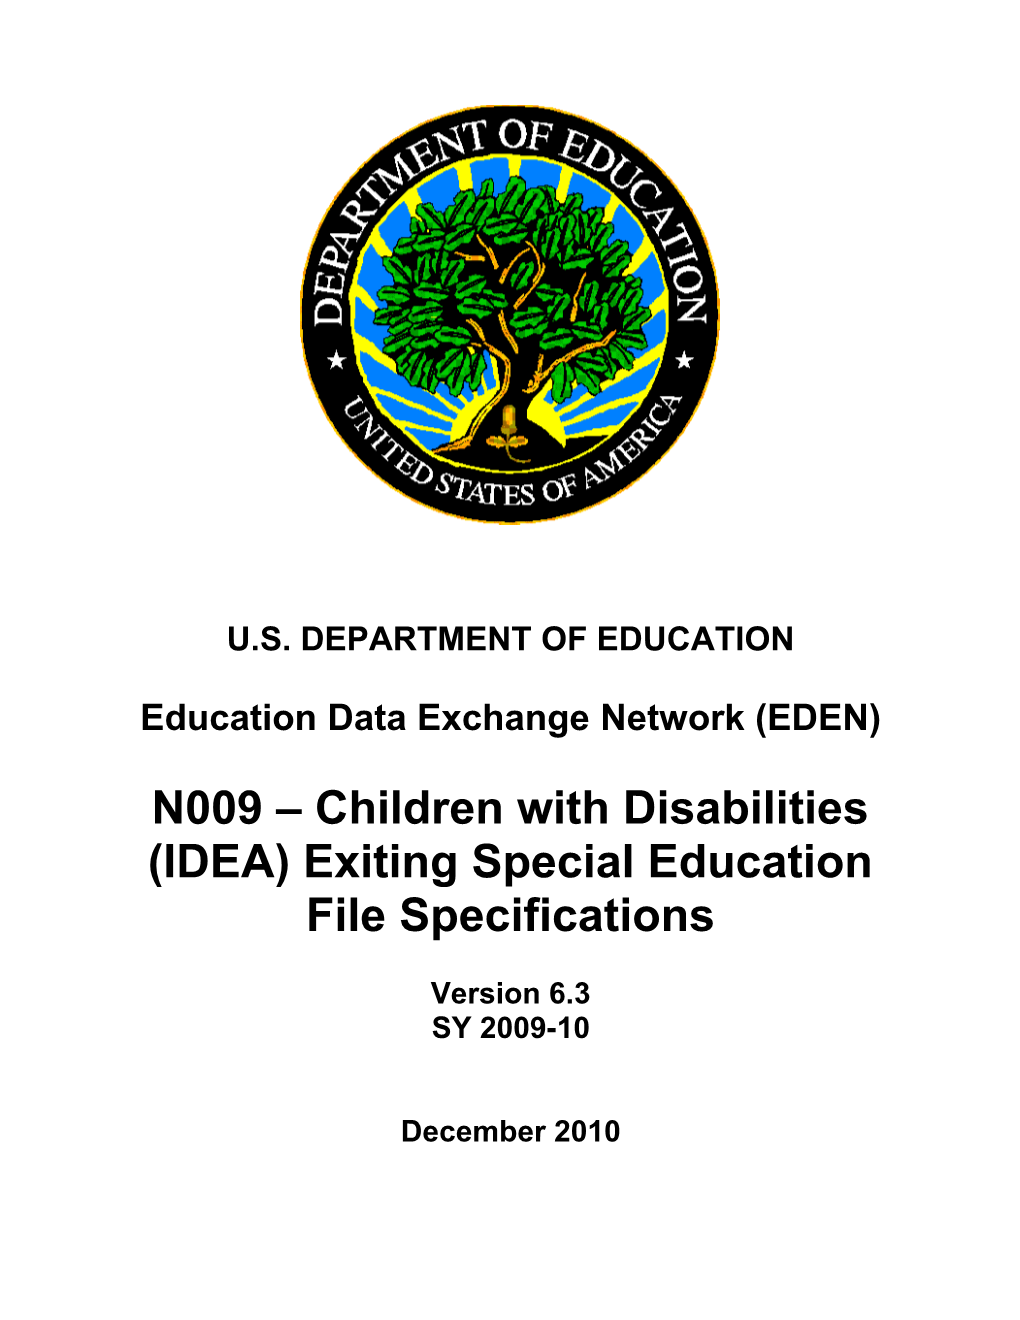 N009-Children with Disabilities (IDEA) Exiting Special Education File Specifications (MS Word)